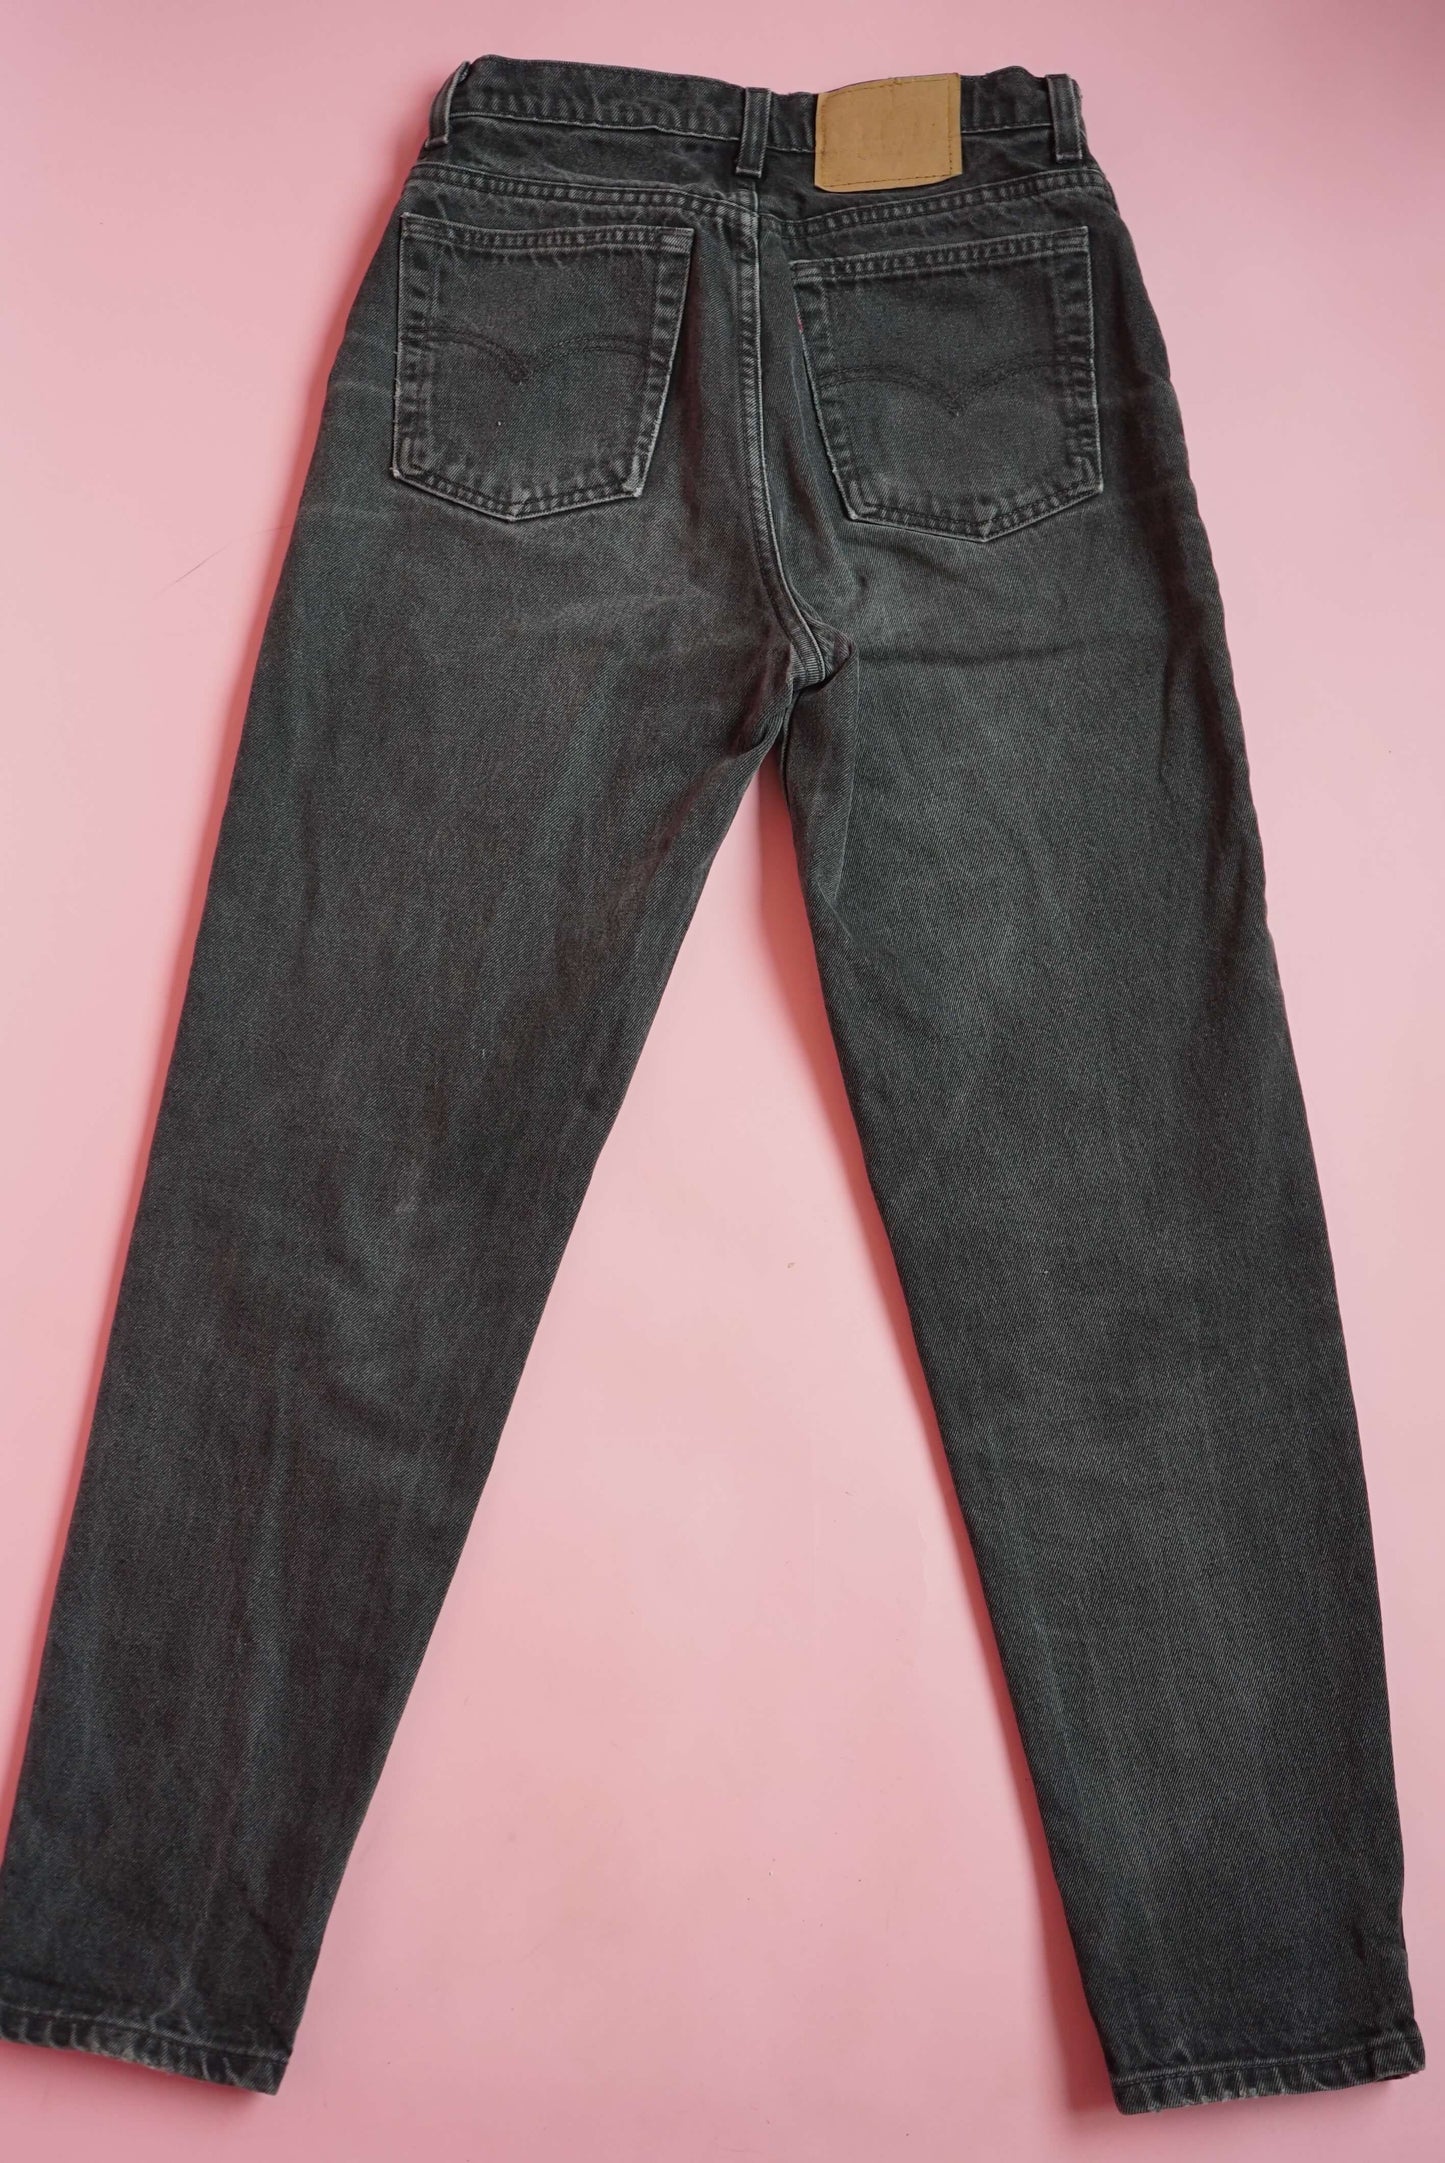 High Waisted Black Vintage Levis Jeans Tapered W31-32